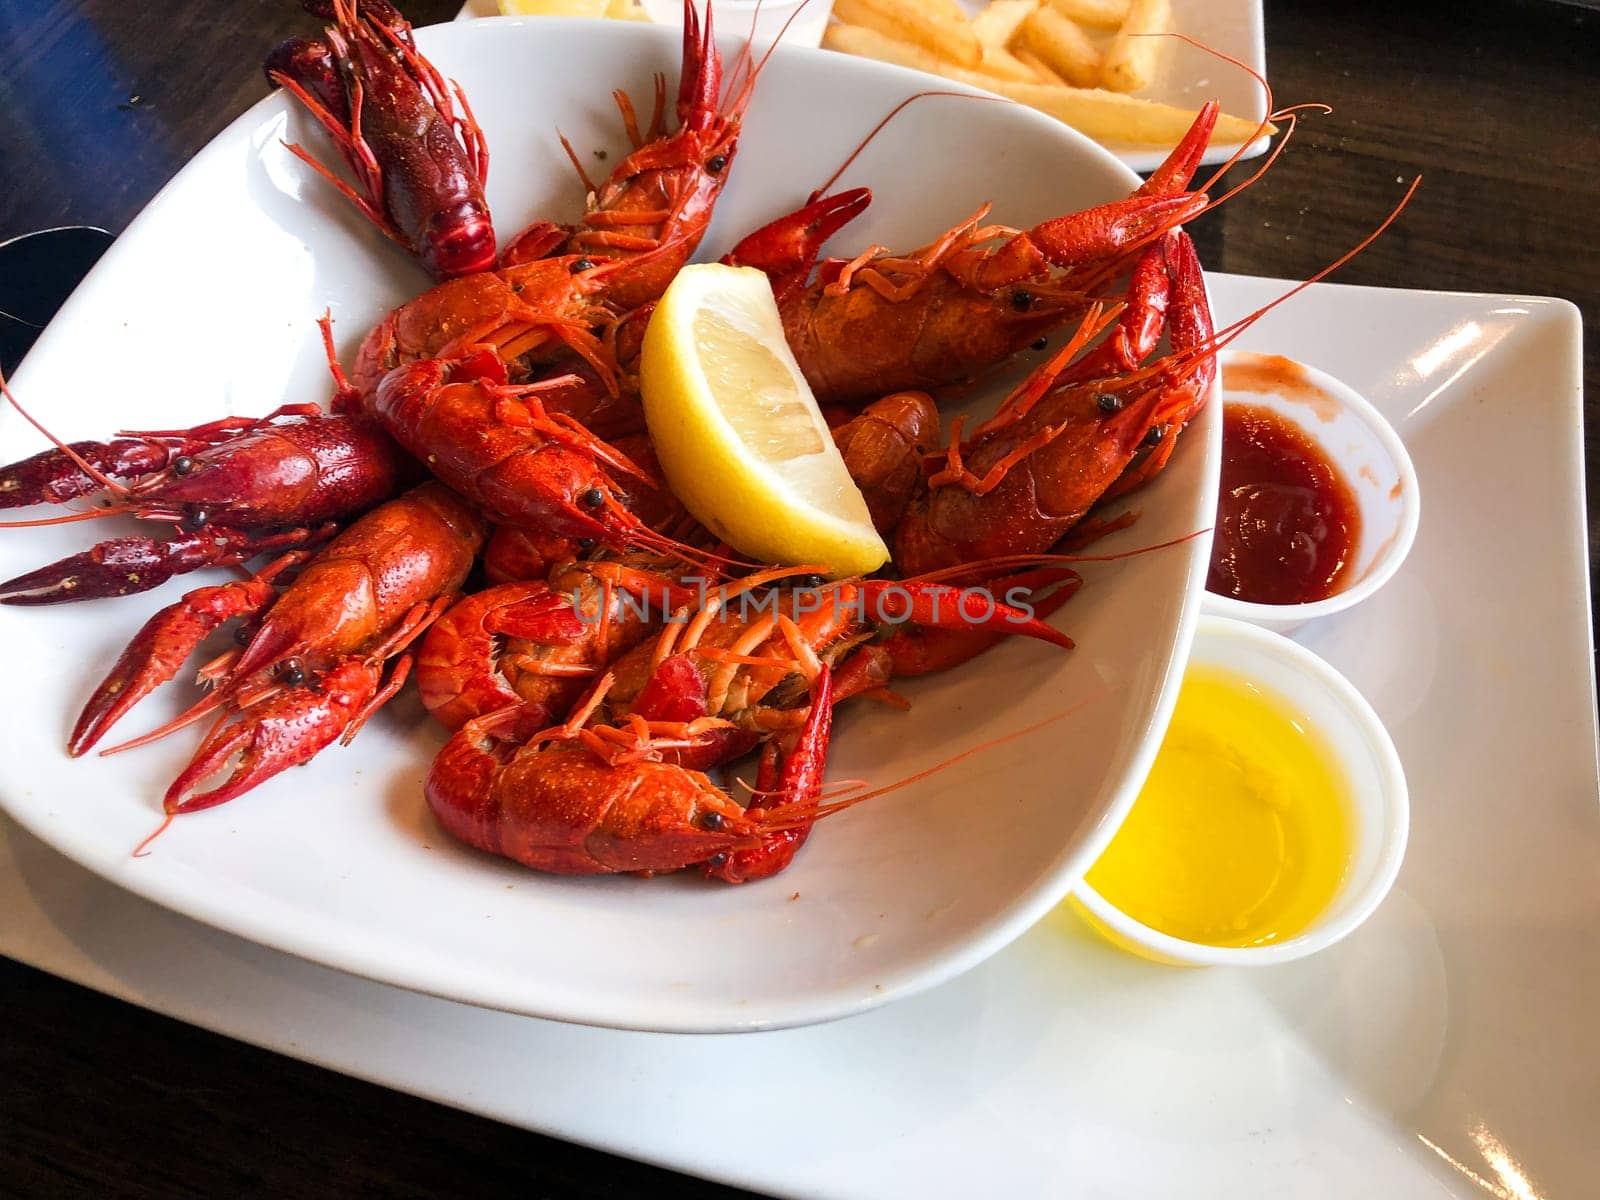 Crawfish or crayfish boil for dinner at a Southern restaurant in the United States. This freshwater seafood is a delicacy in some areas.